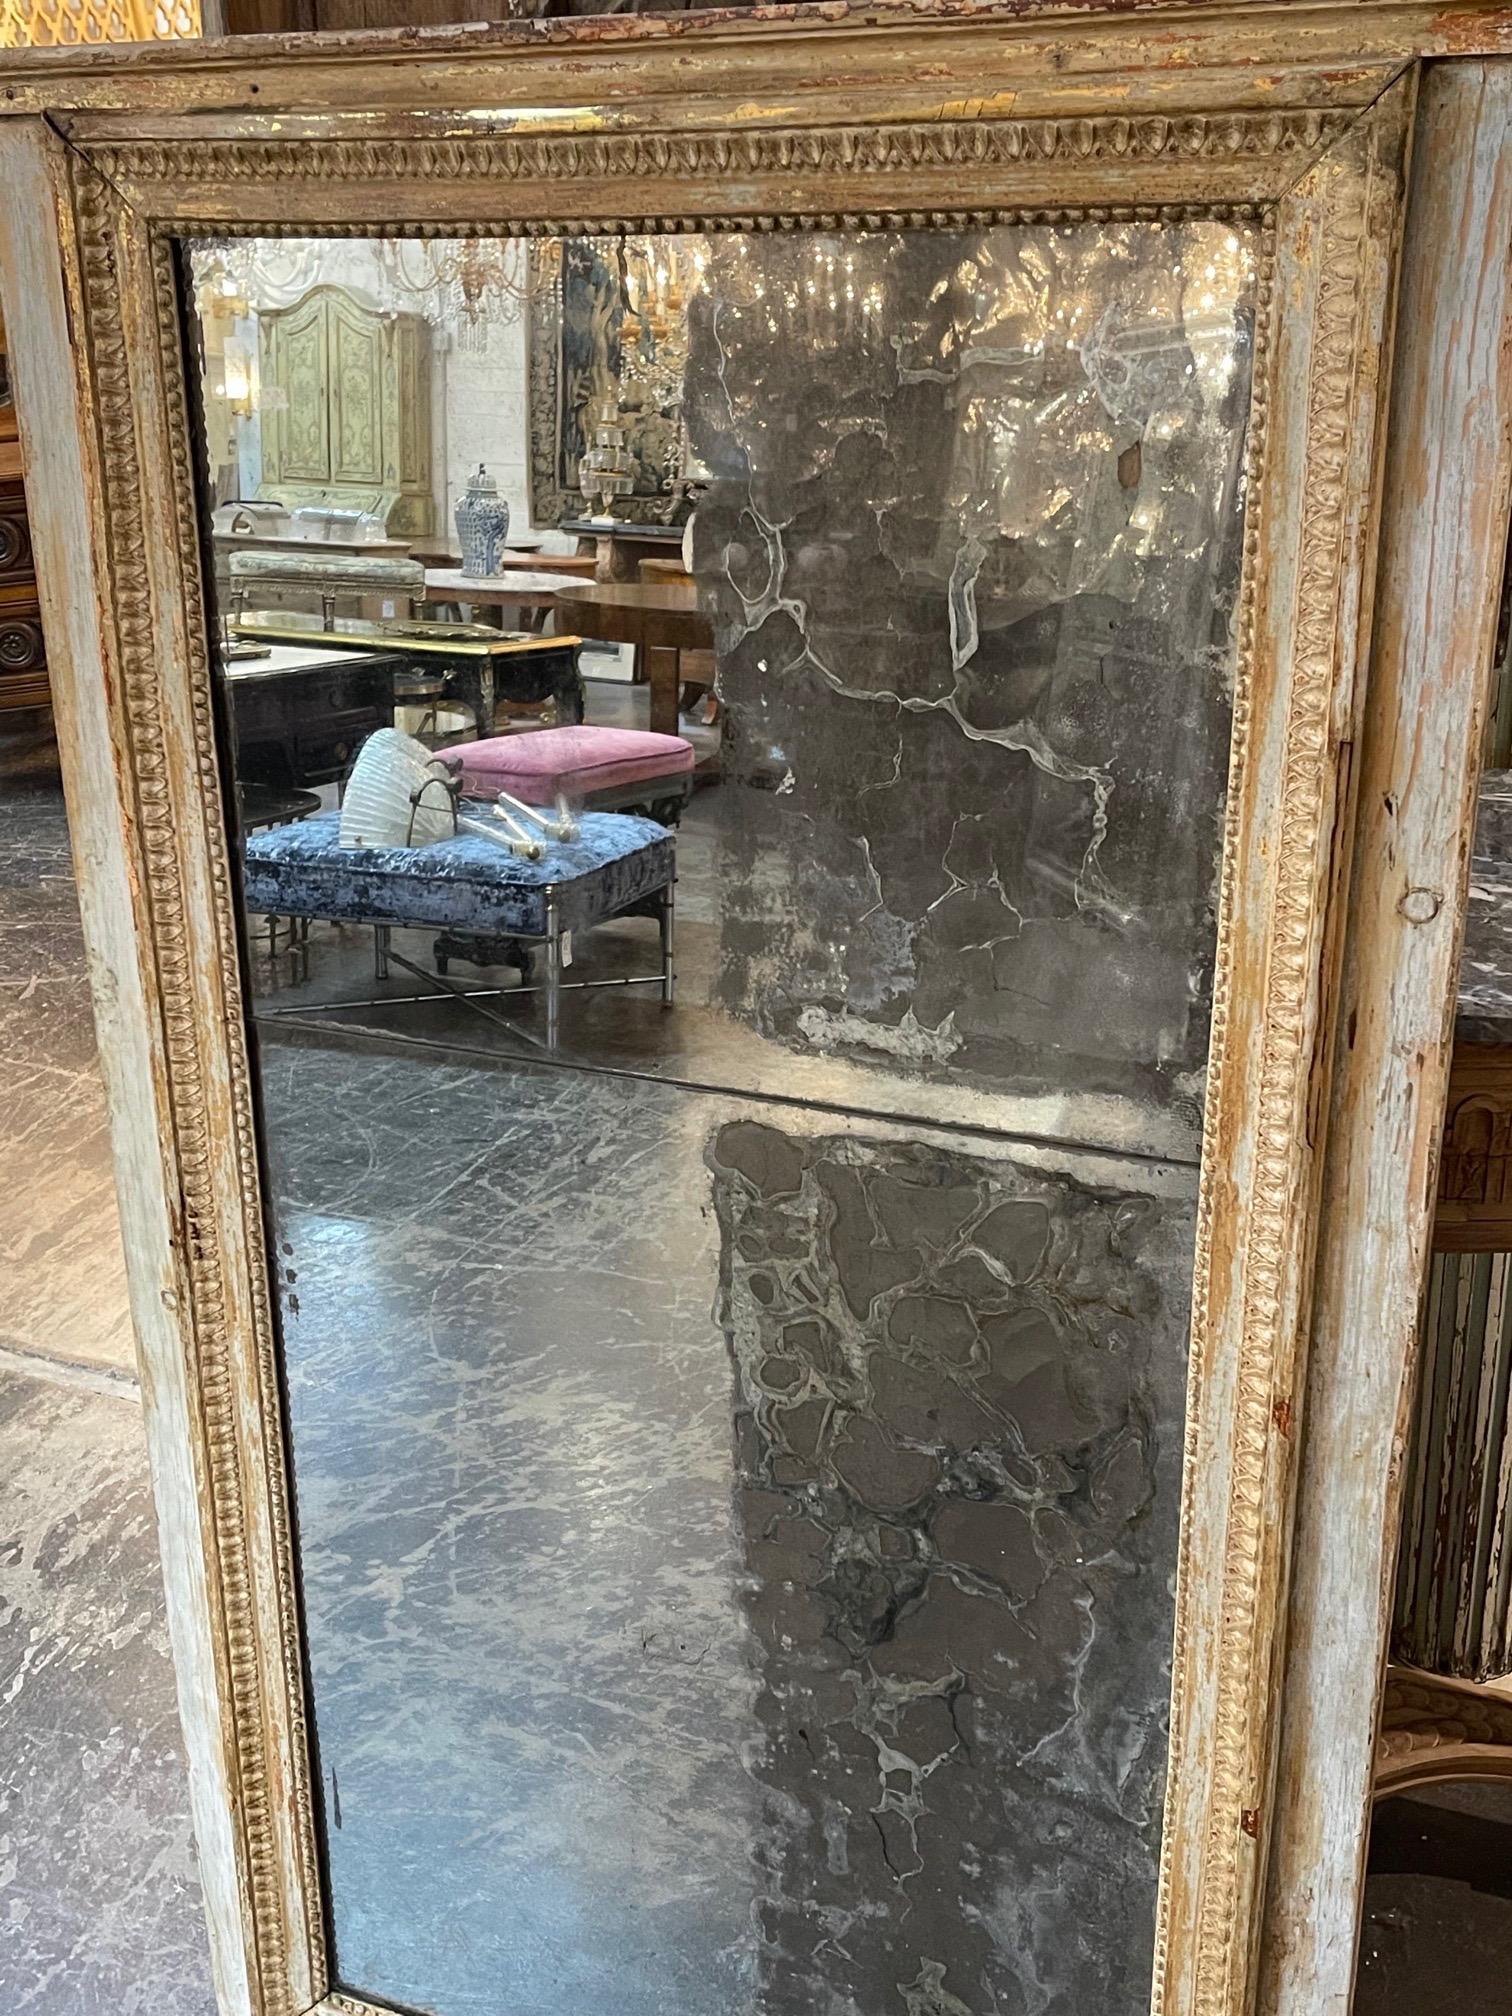 Pretty 18th century French Directoire divided glass mirror. Very nice patina on the frame with the colors of grey and gold. The mirror is original mercury glass.